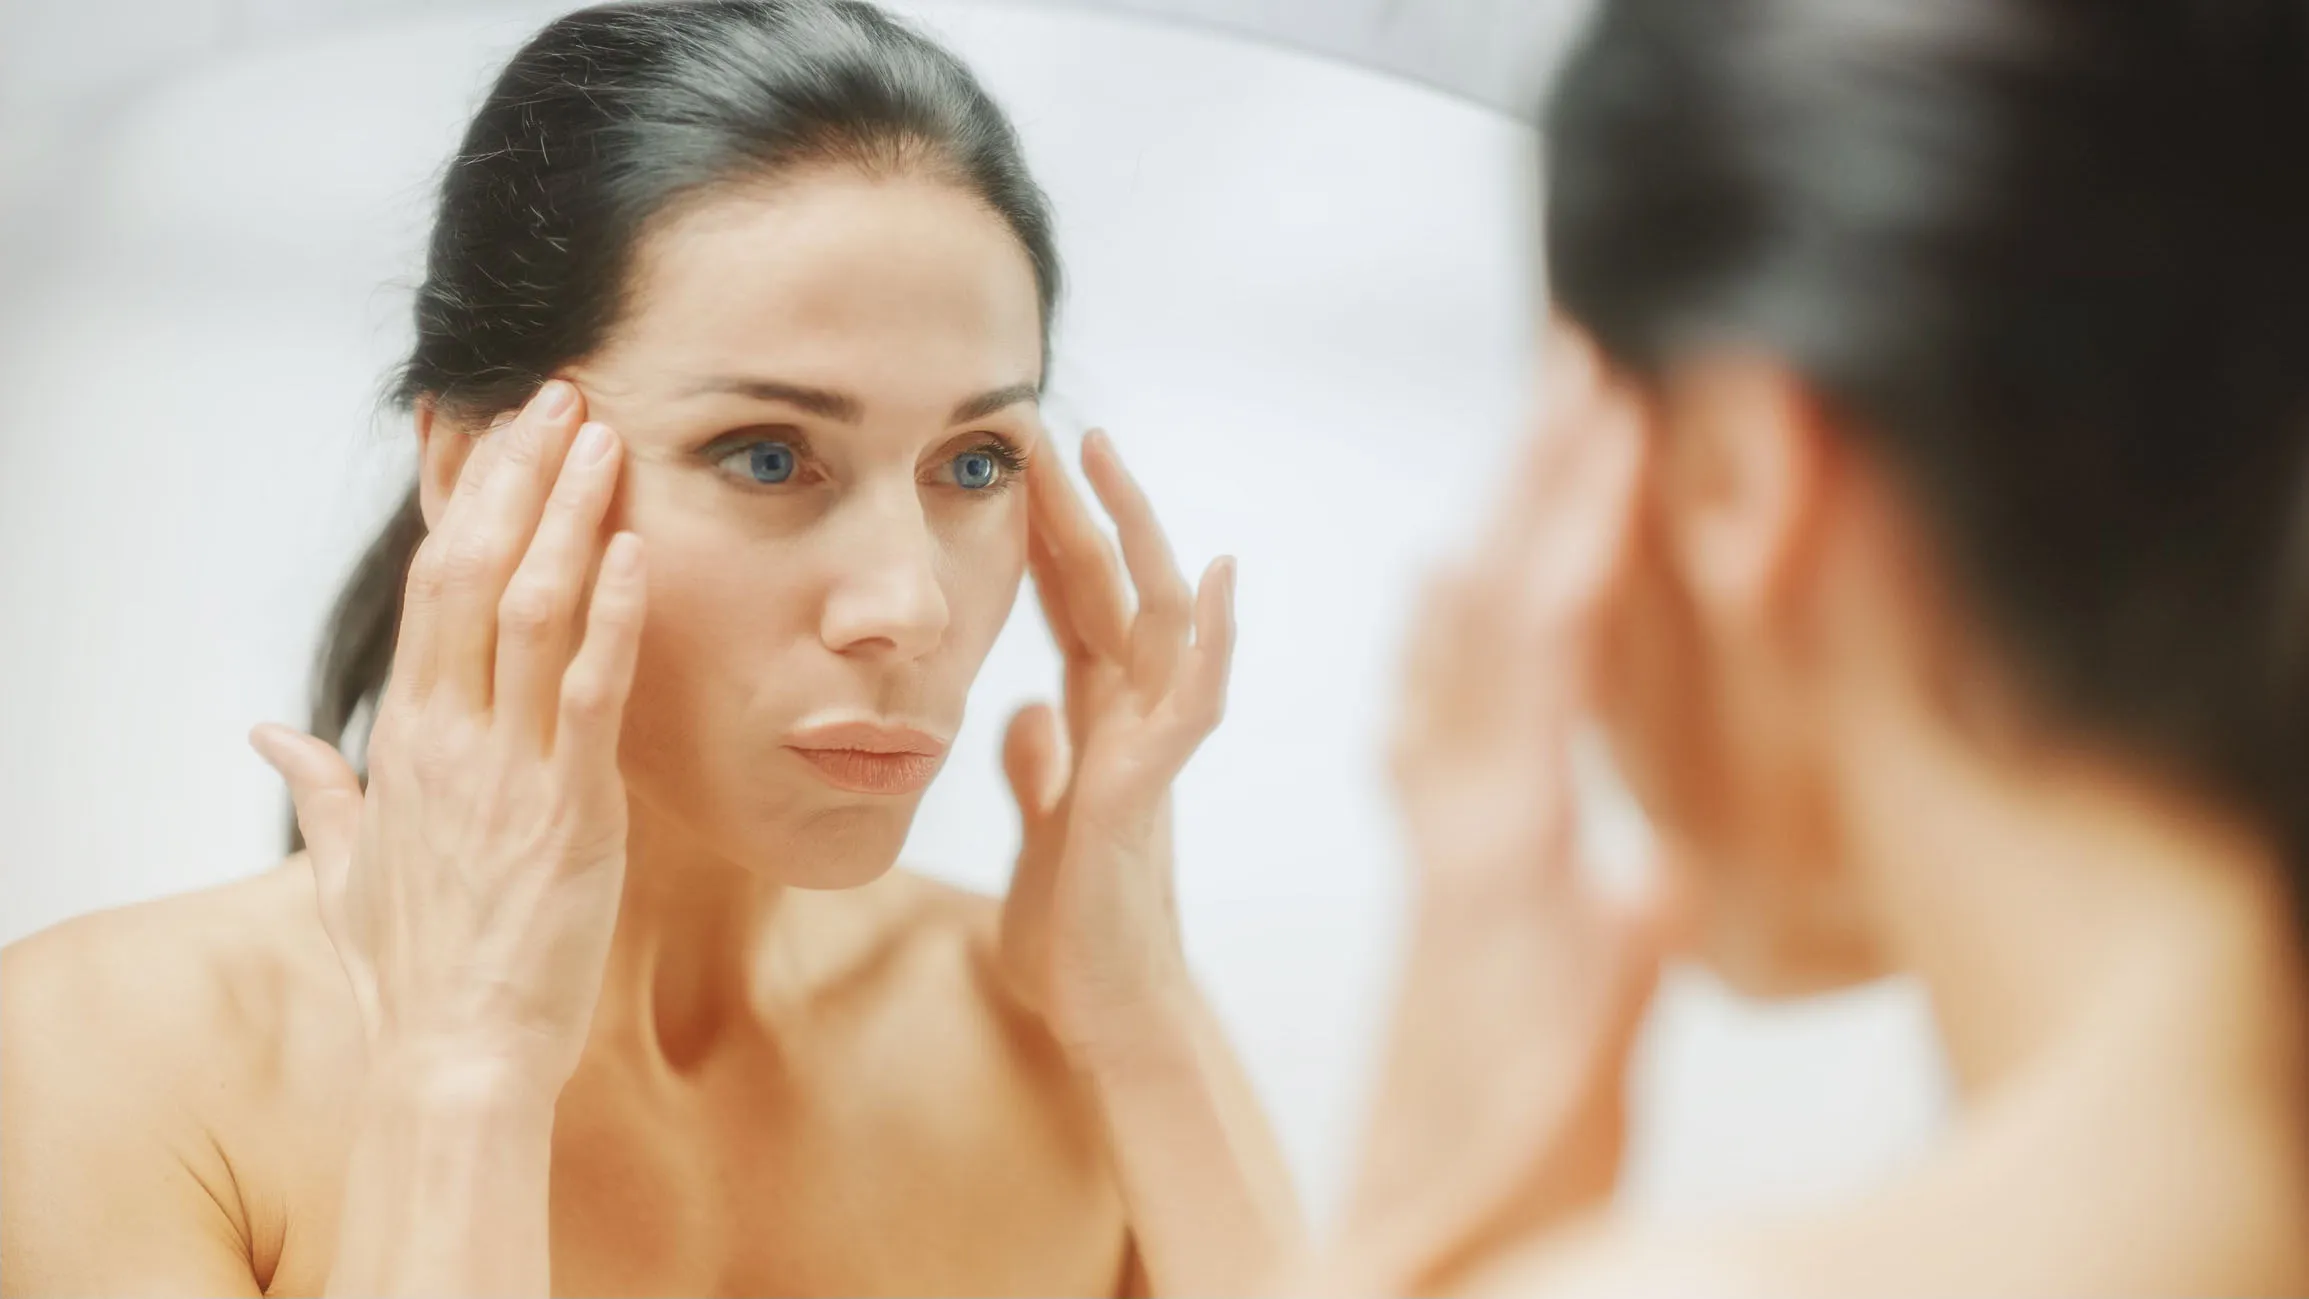 A woman in her 40s looking at herself in a mirror and thinking about facelift surgery.